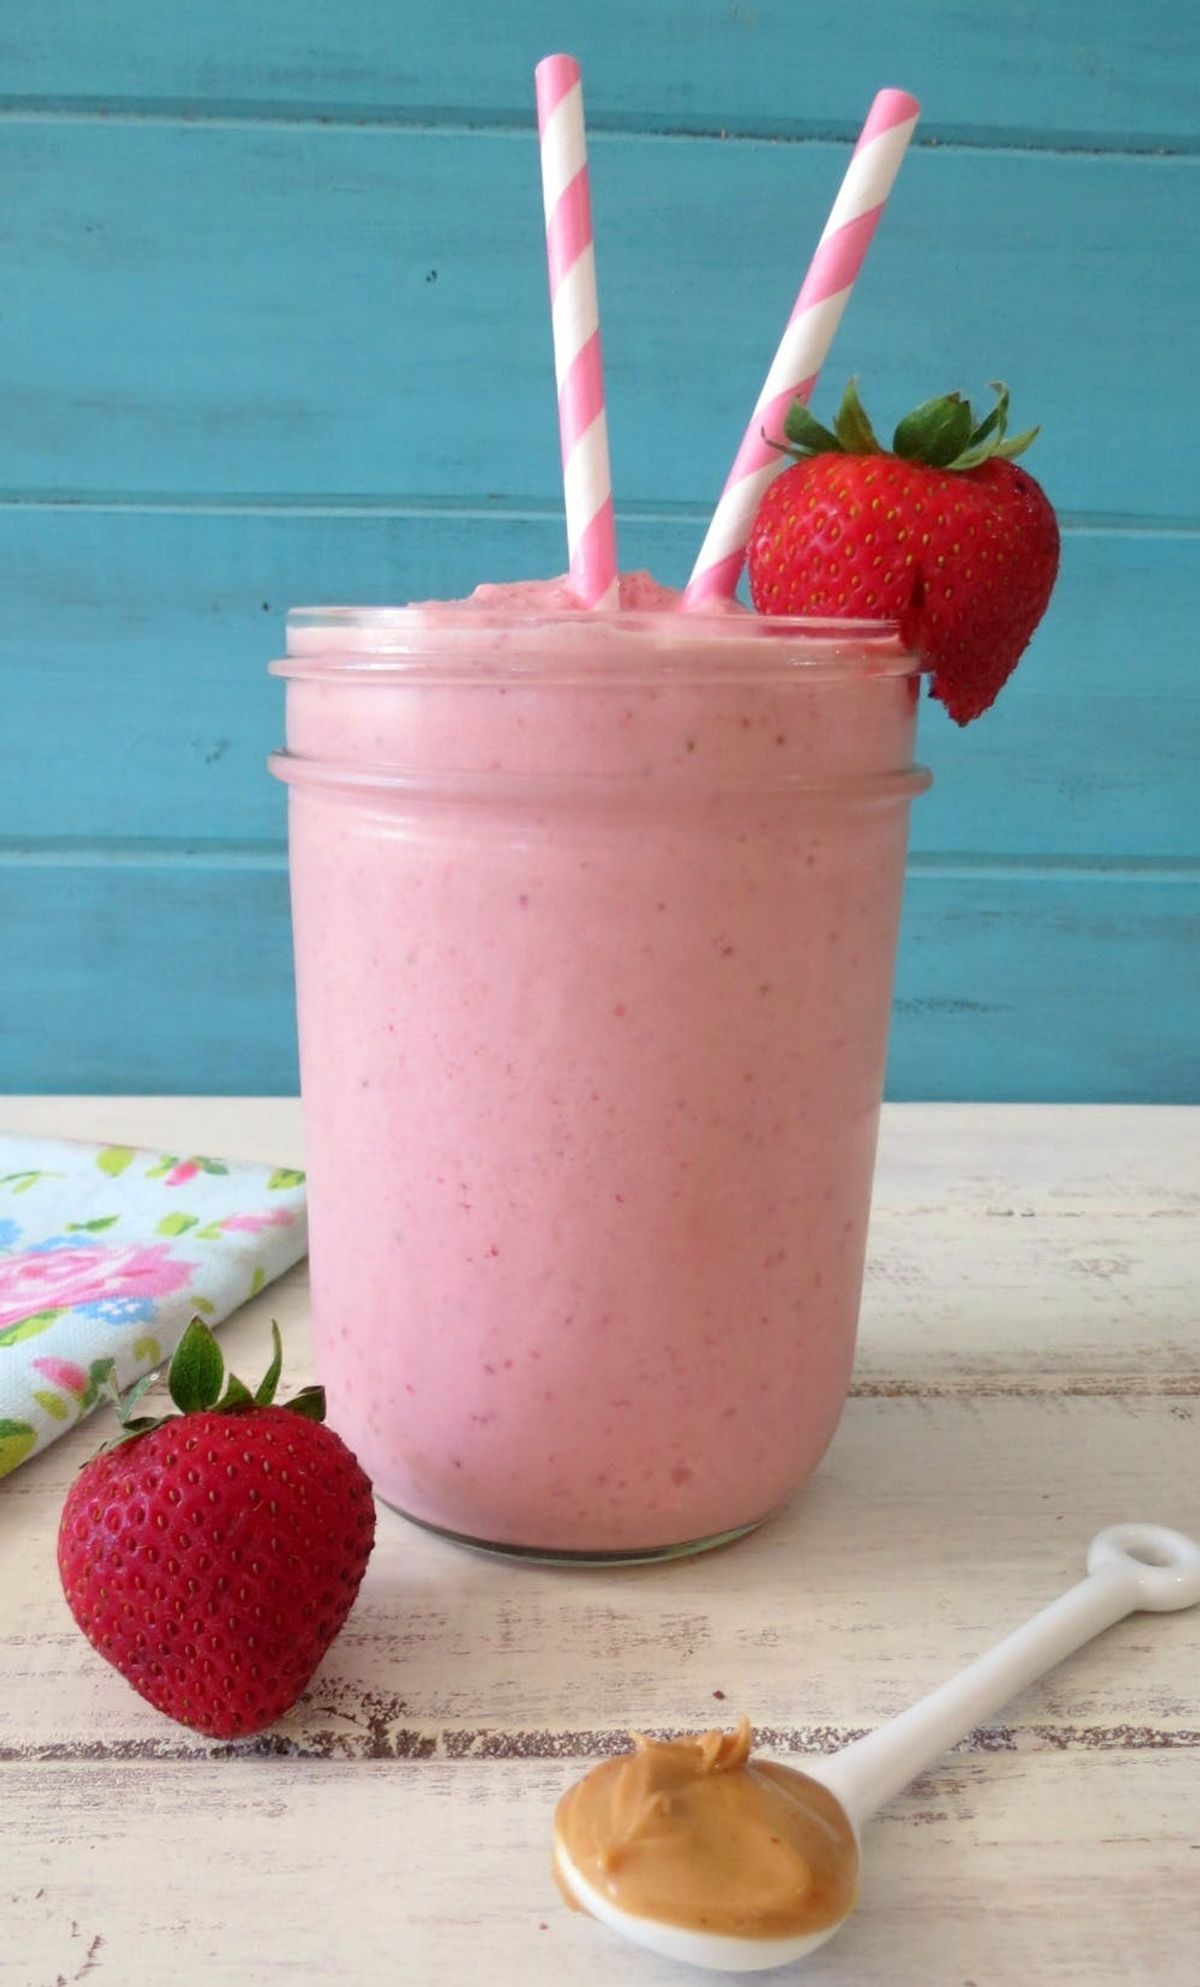 10 Smoothie Recipes That Won’t Pack On the Pounds